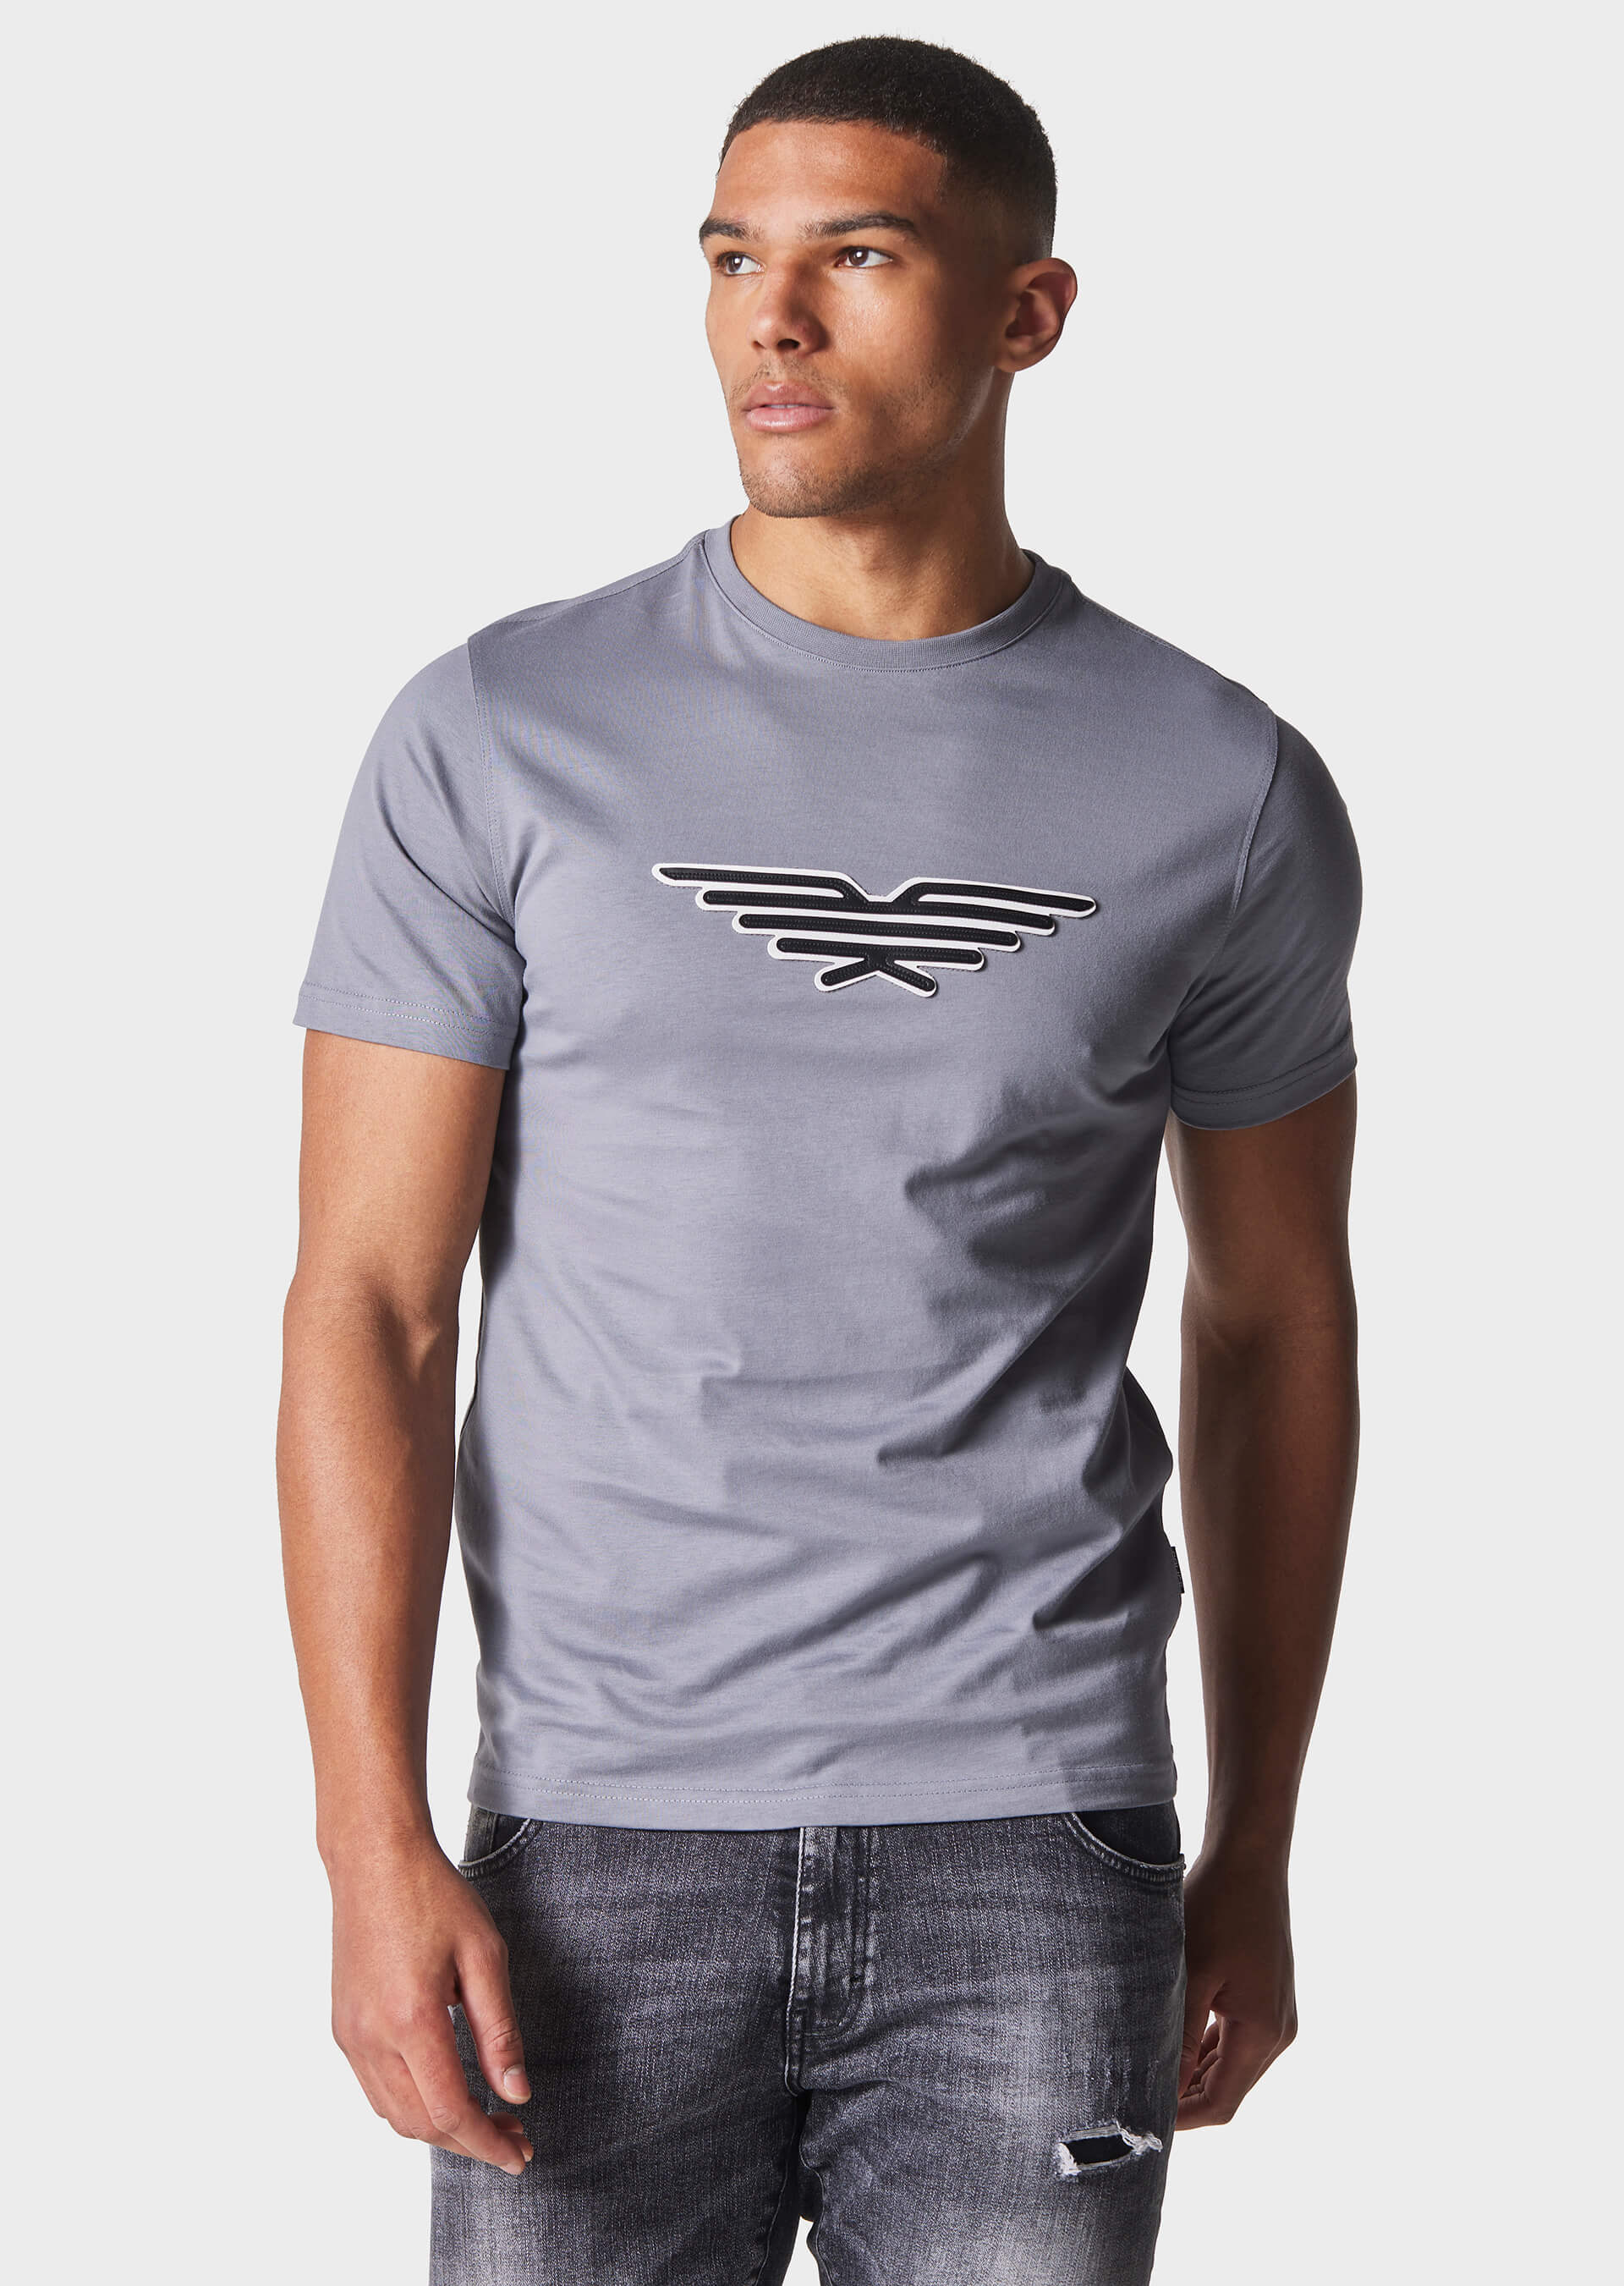 883 POLICE FOAKES T-SHIRT - GREY